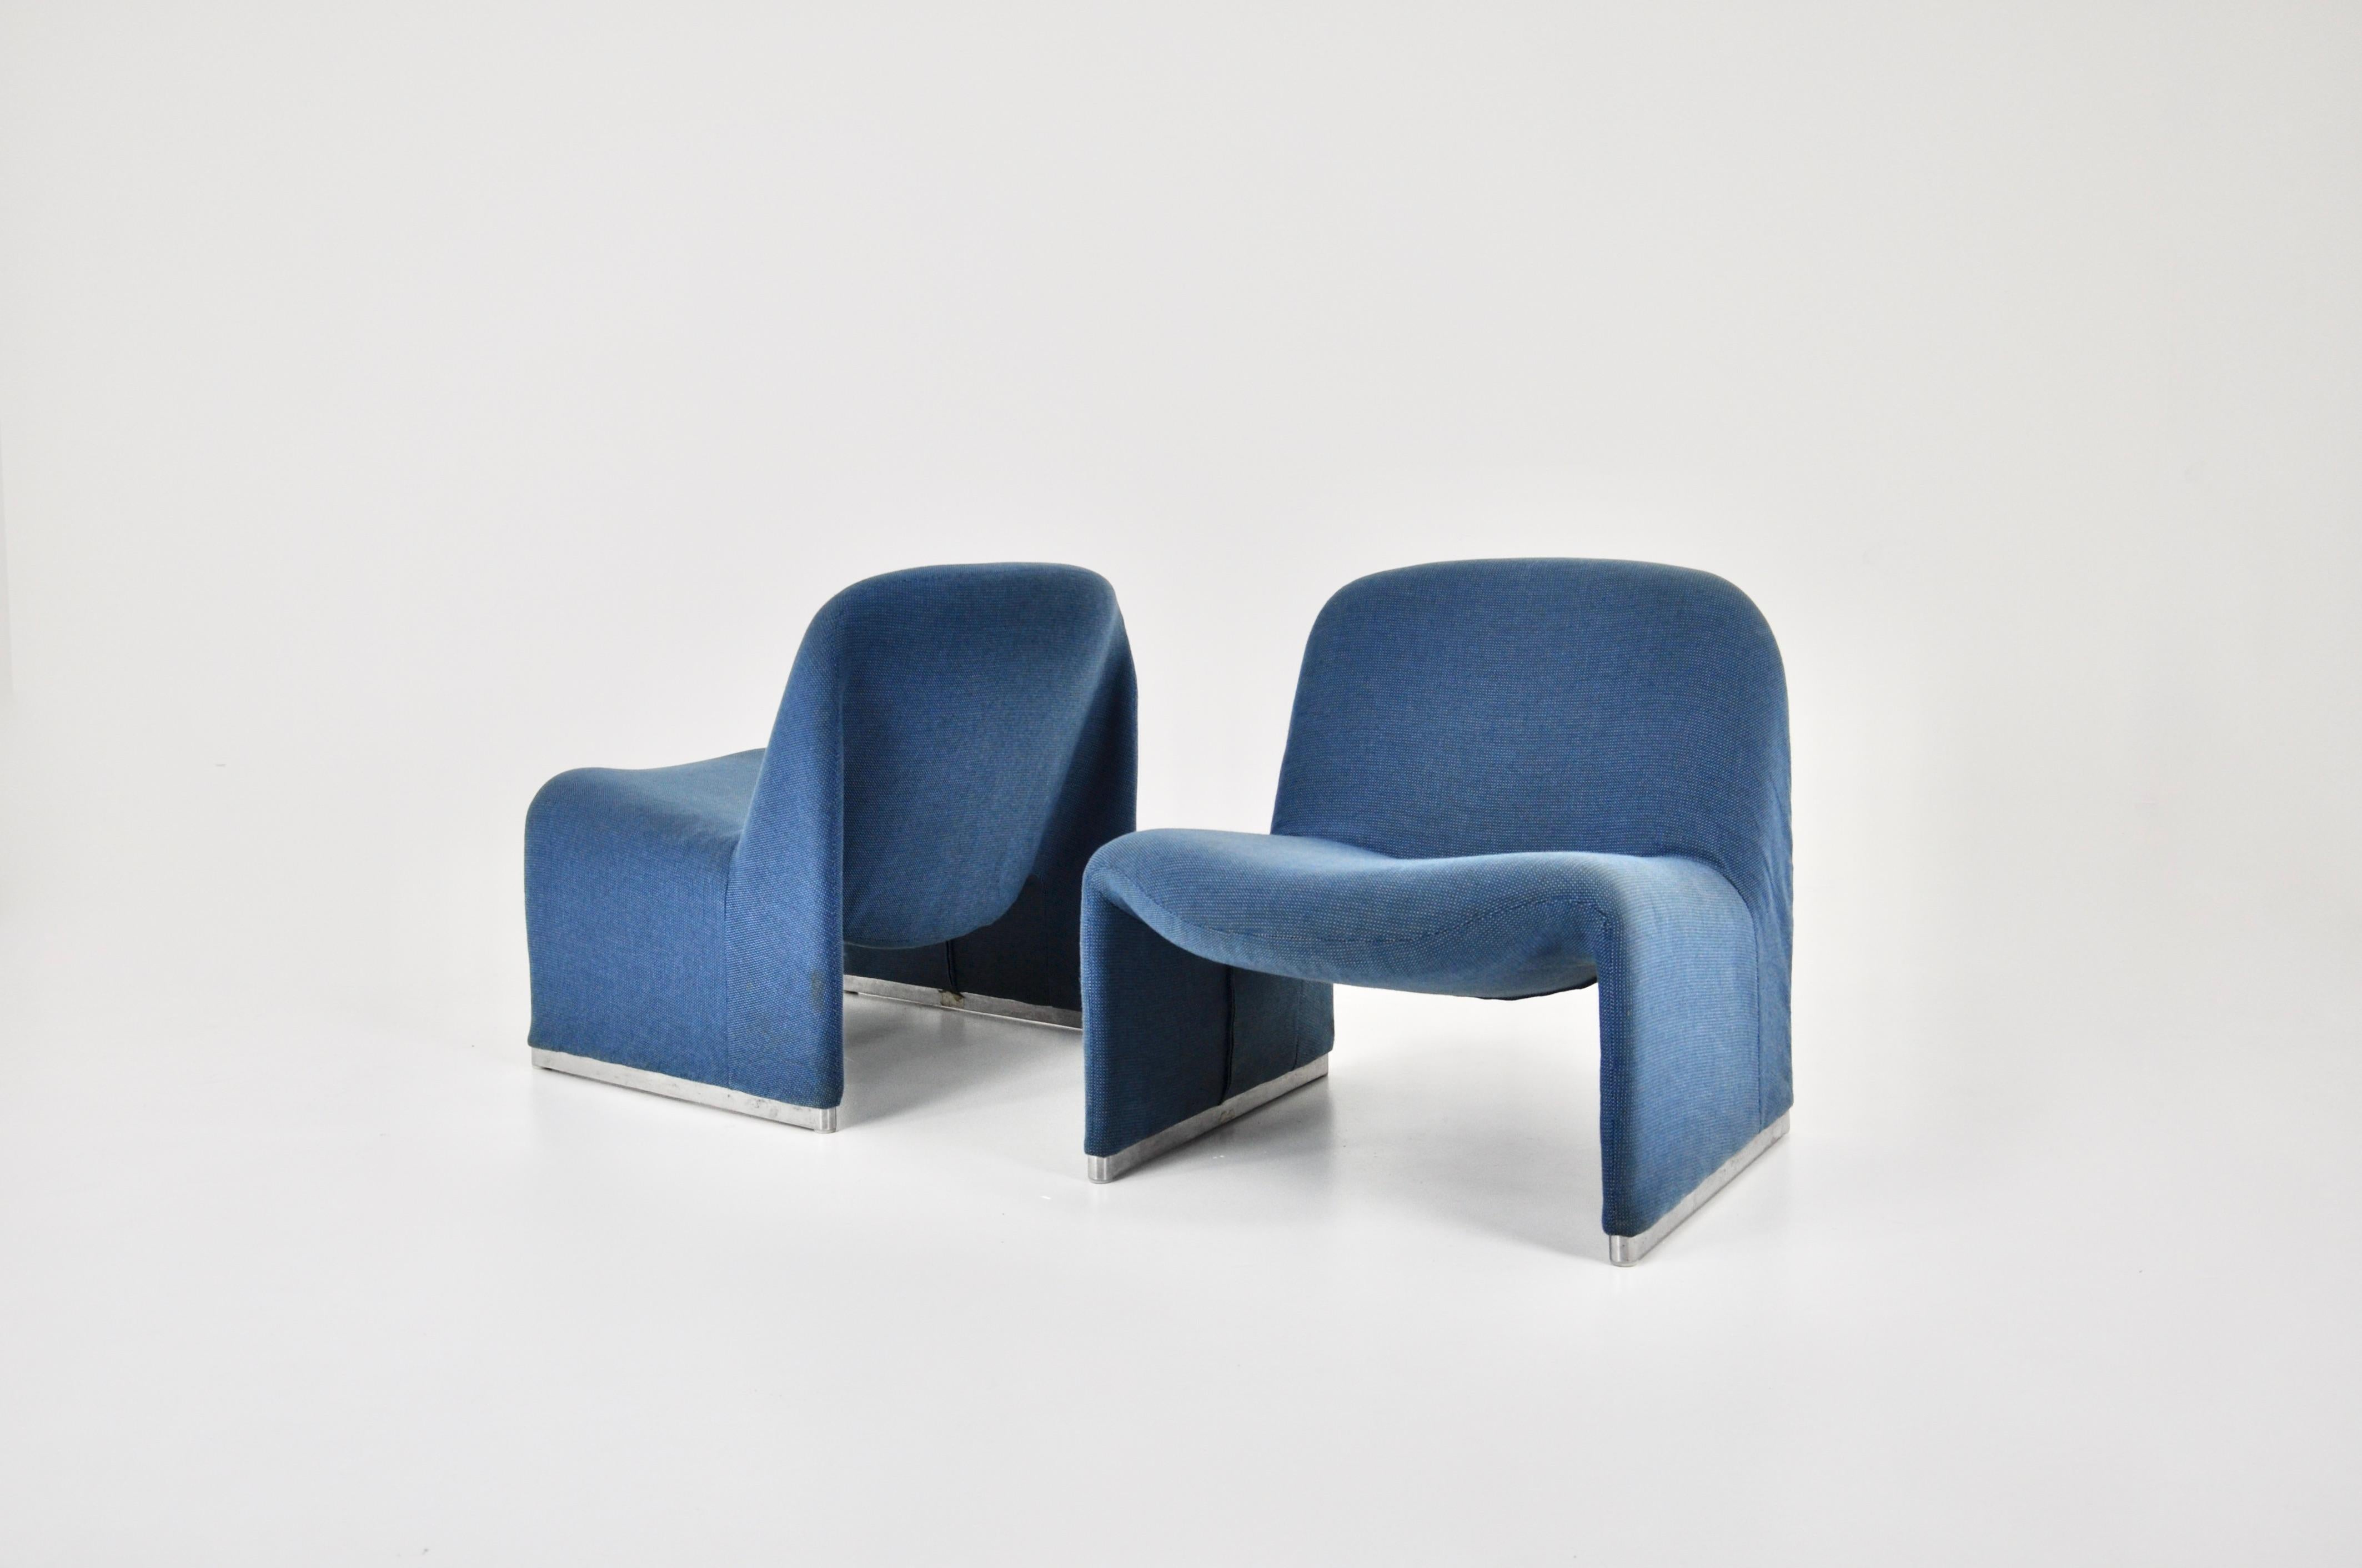 Armchair in bleu fabric. Wear due to time and age of the chair (see photo). Measures: seat height: 39cm.